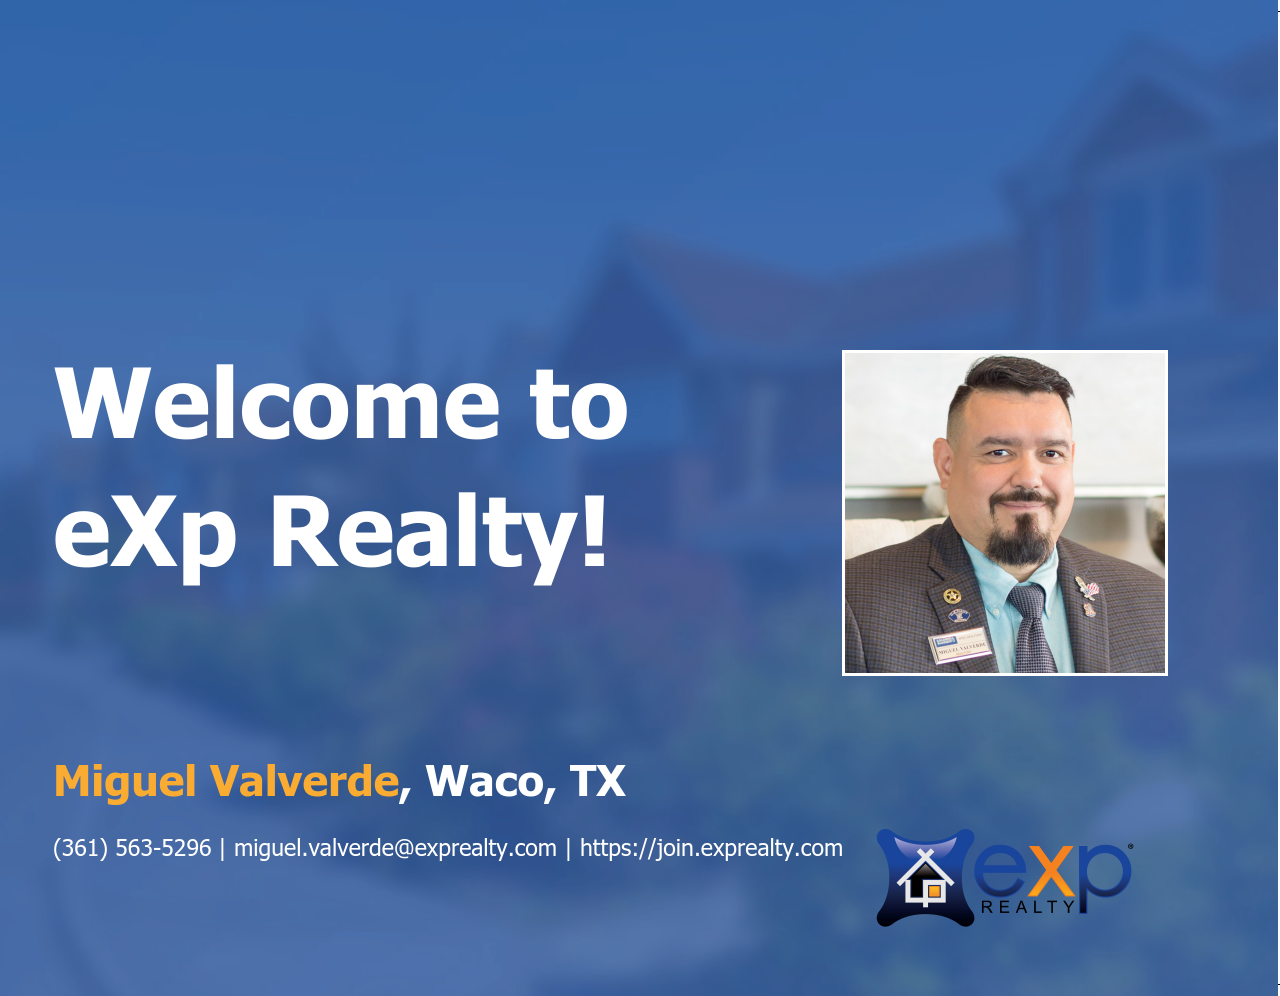 Miguel Valverde Joined eXp Realty!